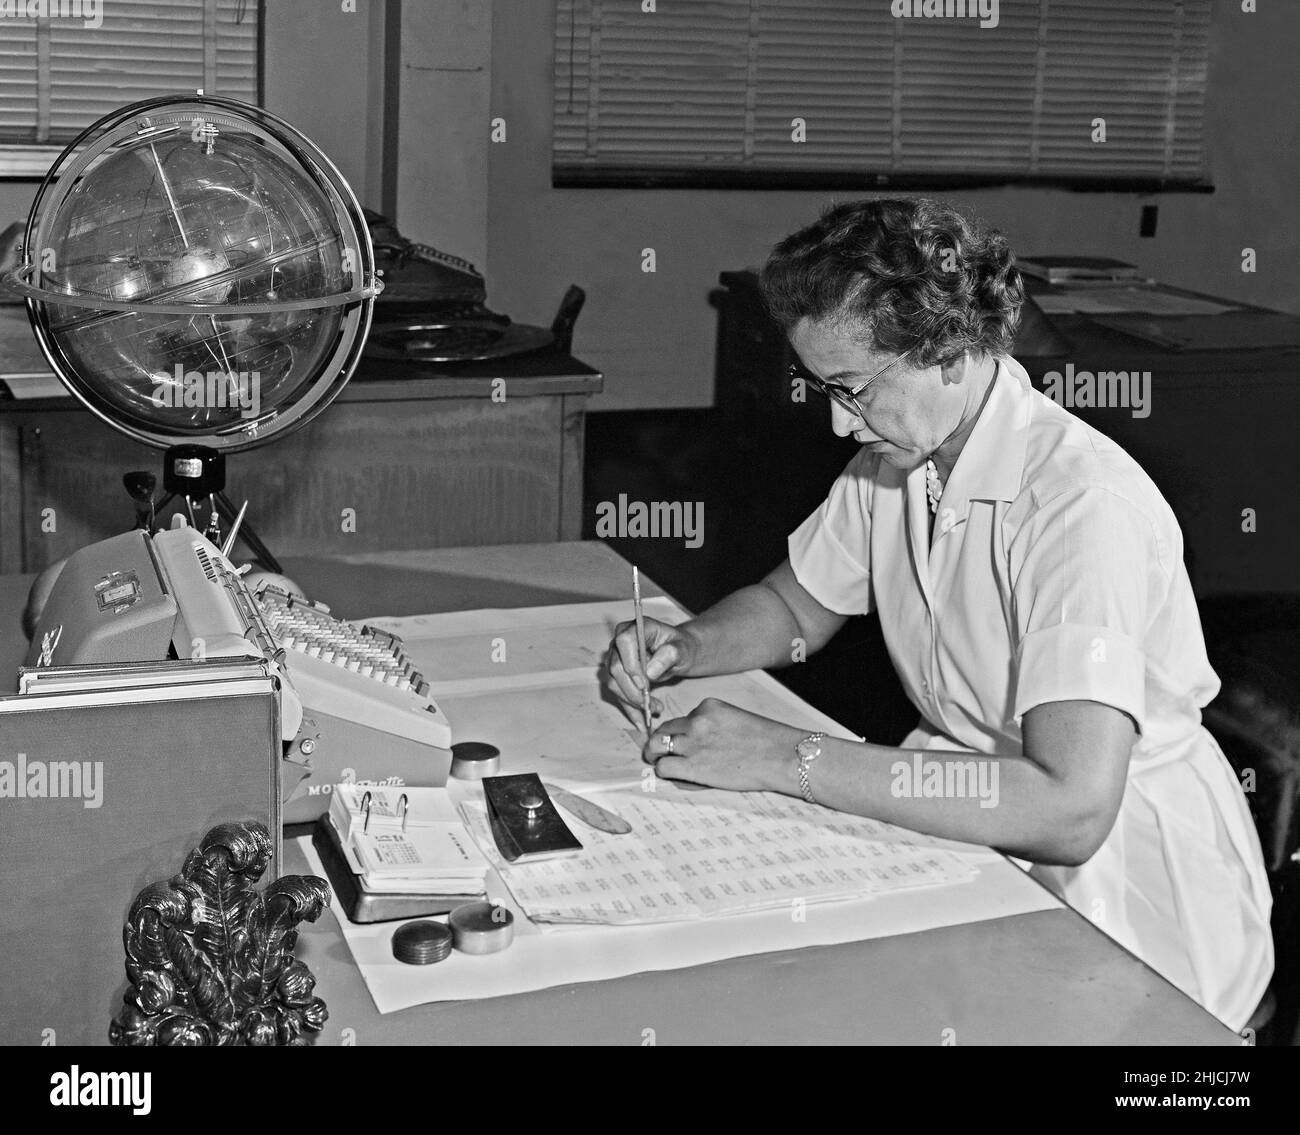 Katherine Johnson working at Langley Research Center, Virginia, in 1962. Johnson (1918-2020) was a US physicist and mathematician, one of a number of African-American women hired to work as 'computers' at NACA (the predecessor to NASA). She worked at Langley from 1953 until her retirement in 1986. Over the course of her career, she calculated the trajectory of the 1961 flight of Alan Shepard, the first American in space, as well as working on the Apollo mission and the Space Shuttle Program. Stock Photo